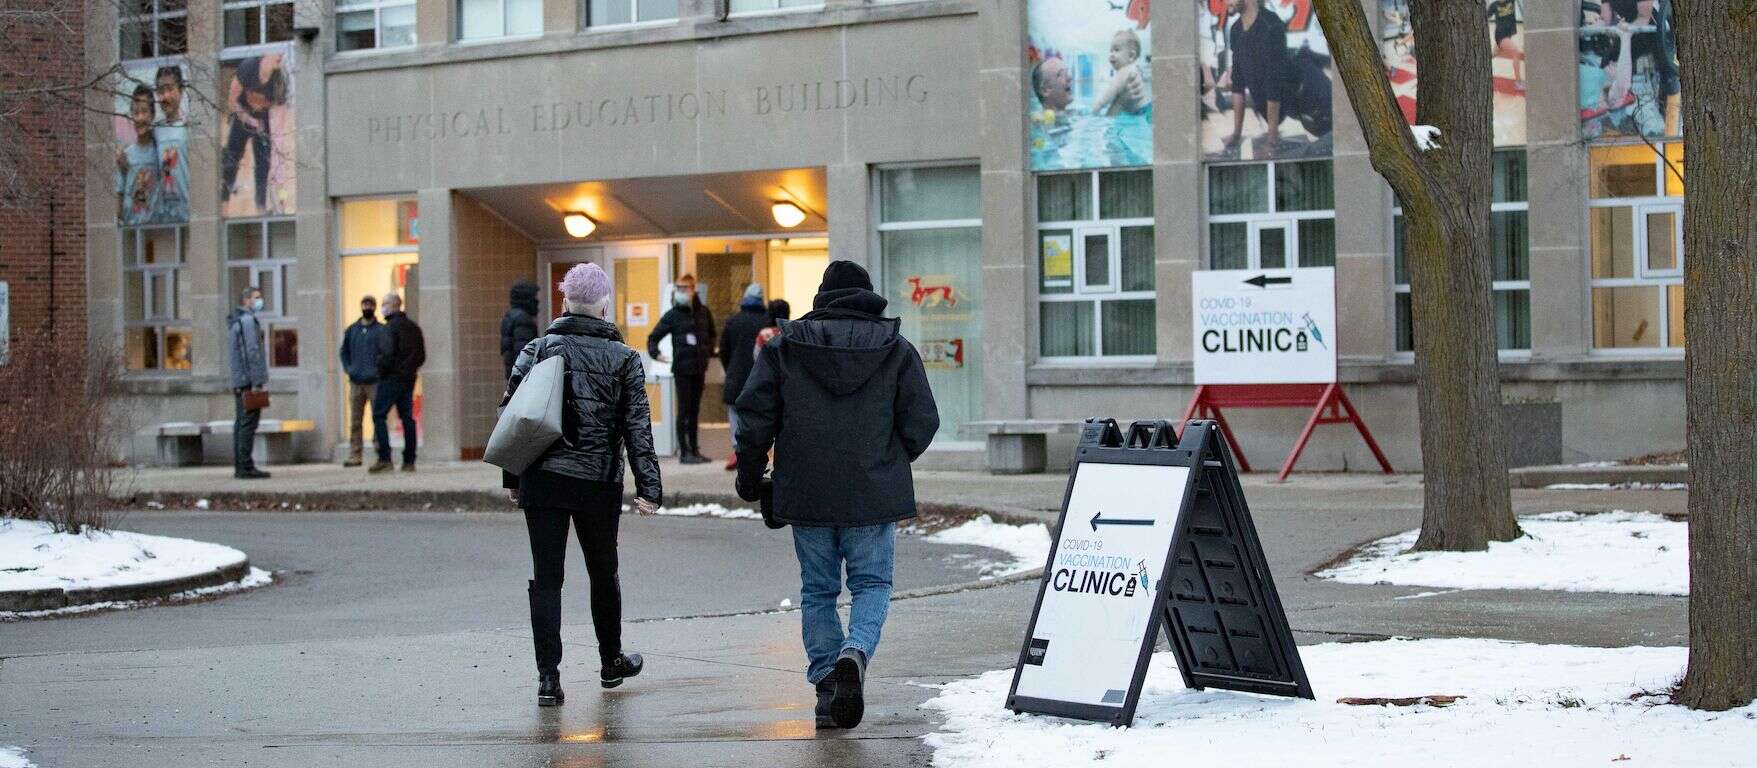 Several people shown from behind as they walk into the Physical Education Building on the U of G campus